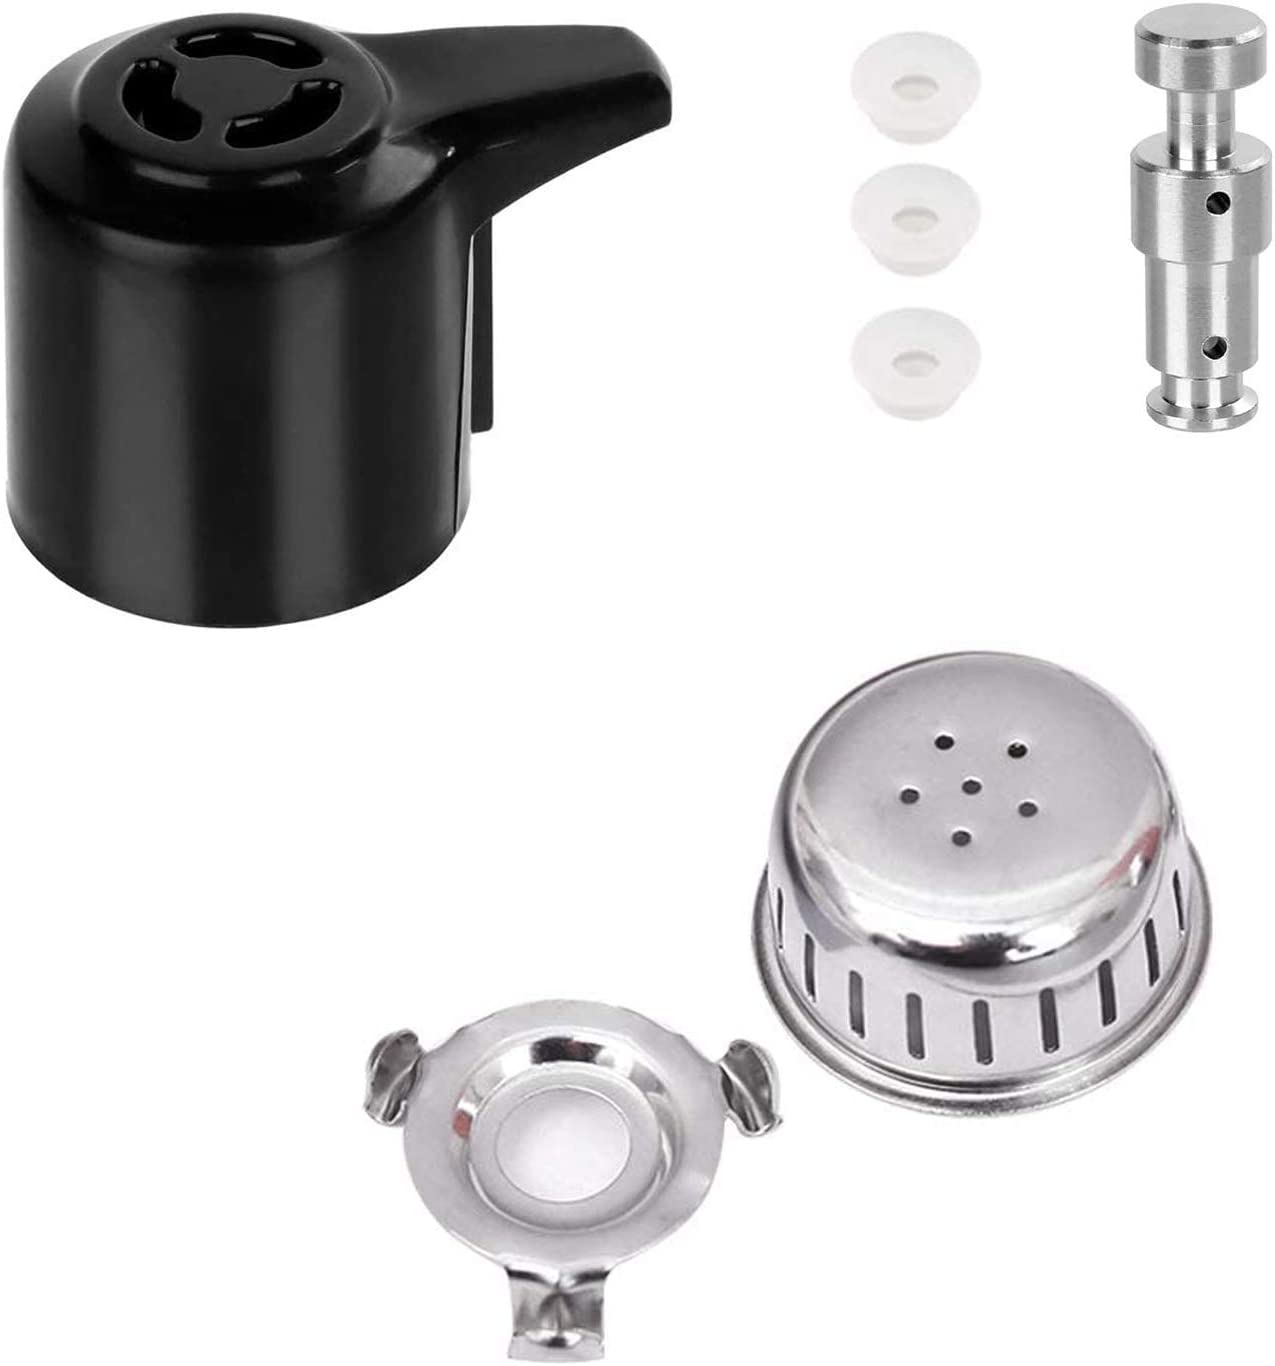 MARRTEUM 2 pcs Universal Replacement Floater and 4 pcs Sealer Pressure  Cooker Parts and Accessories for Pressure Cookers XL, YBD60-100, PPC780